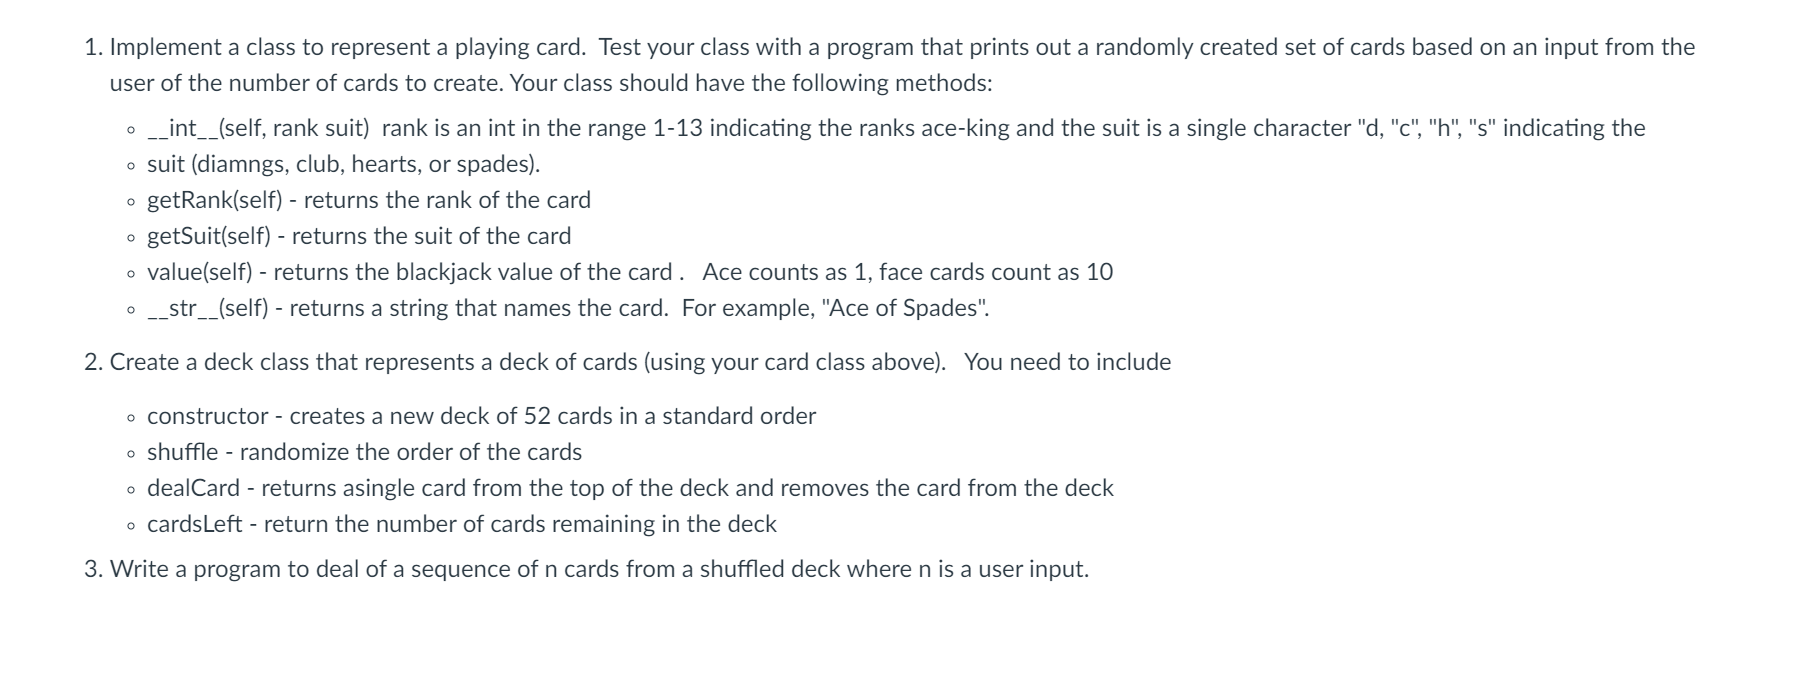 1. Implement a class to represent a playing card. Test your class with a program that prints out a randomly